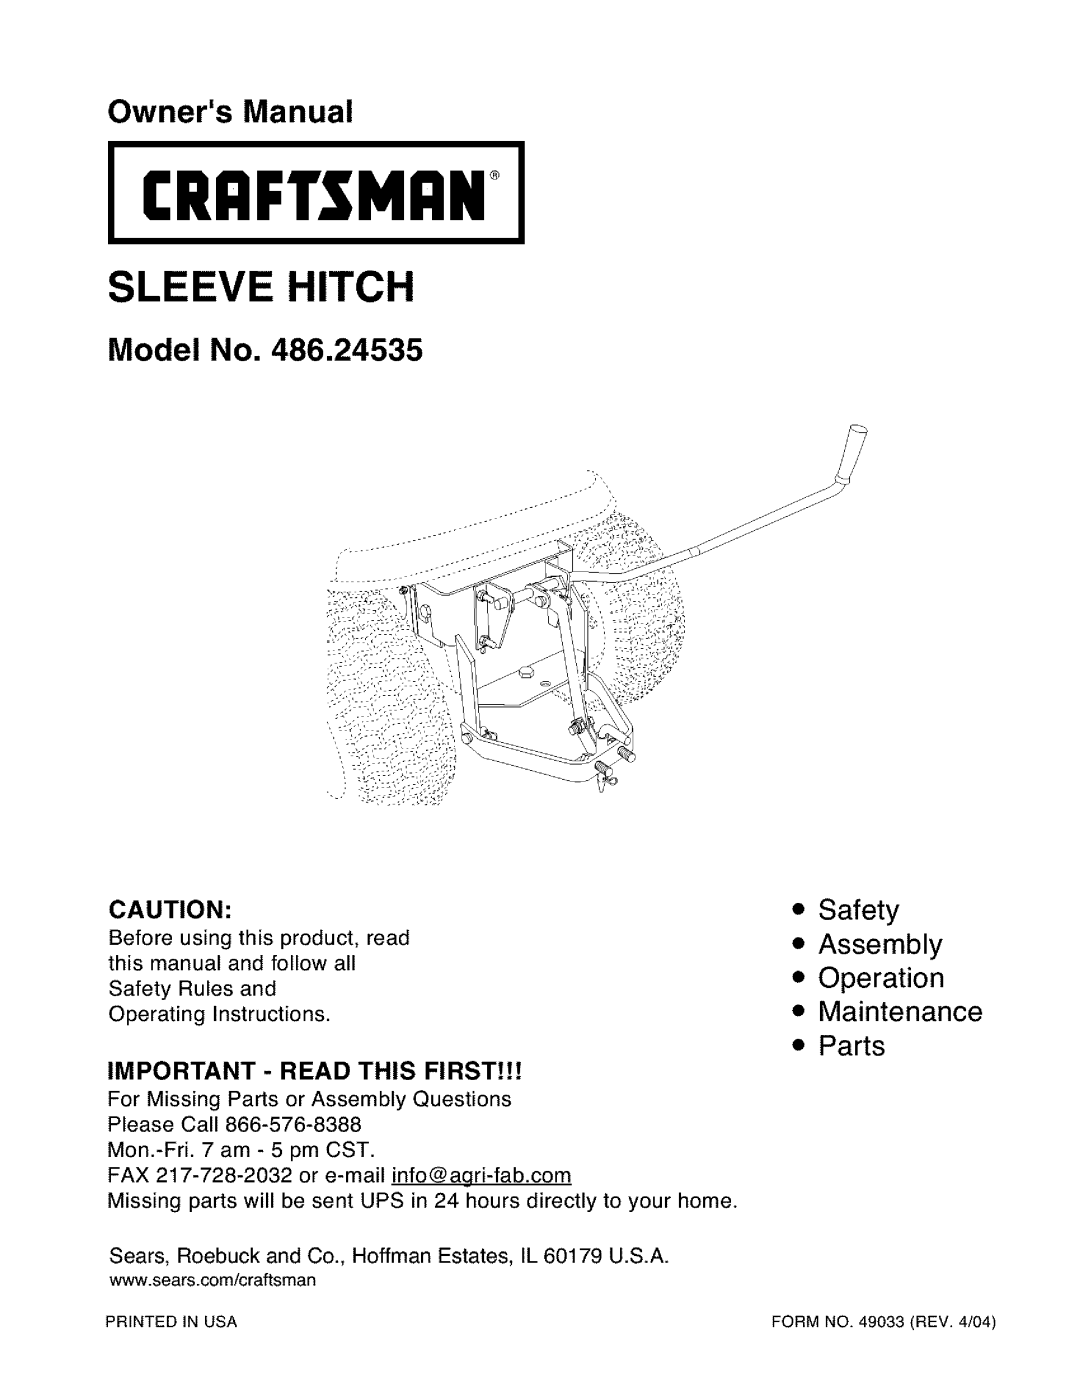 Craftsman 486.24535 owner manual Model No, Icrafisman+, Sleeve Hitch, Safety Assembly Operation Maintenance Parts 